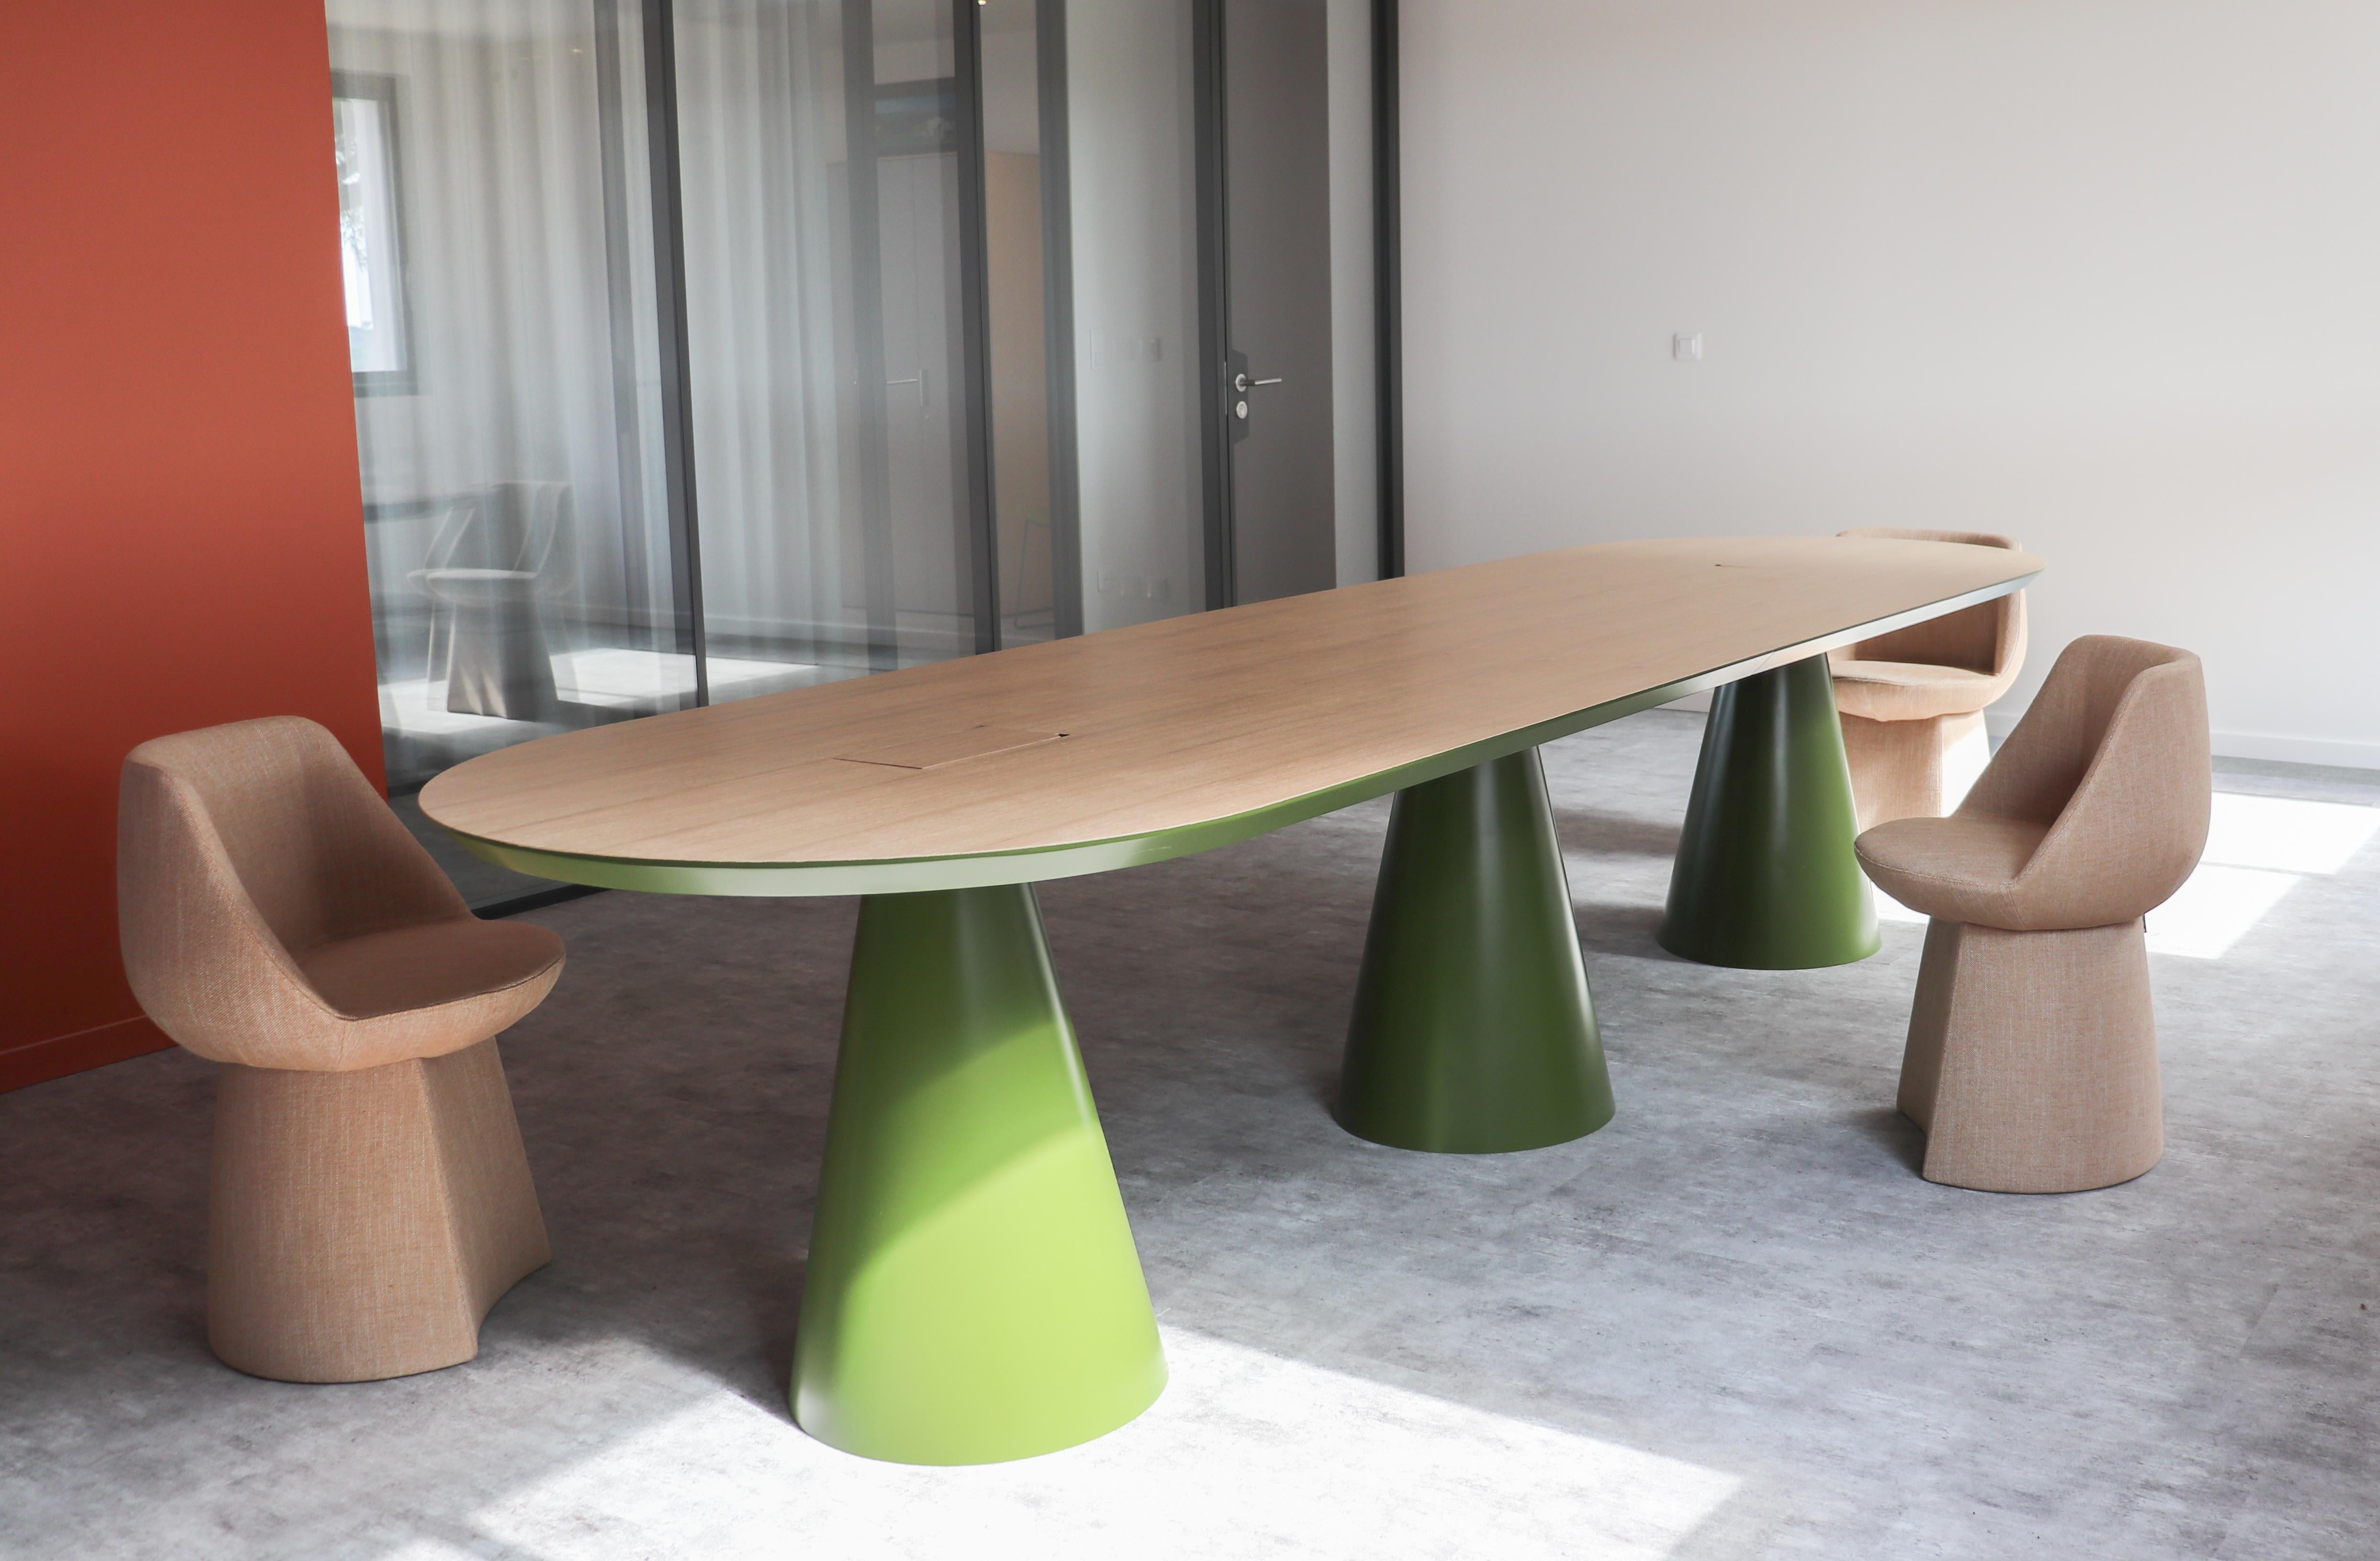 Unique Senventies Meeting table Signed by Gigi Design
Dimensions: D350 x W100 x H74 cm
Materials: Olive green lacquer, natural oak veneer top

Hidden HDMI, USB jacks.
A desire for retro and to dive into the furniture of the 70s.
The three legs